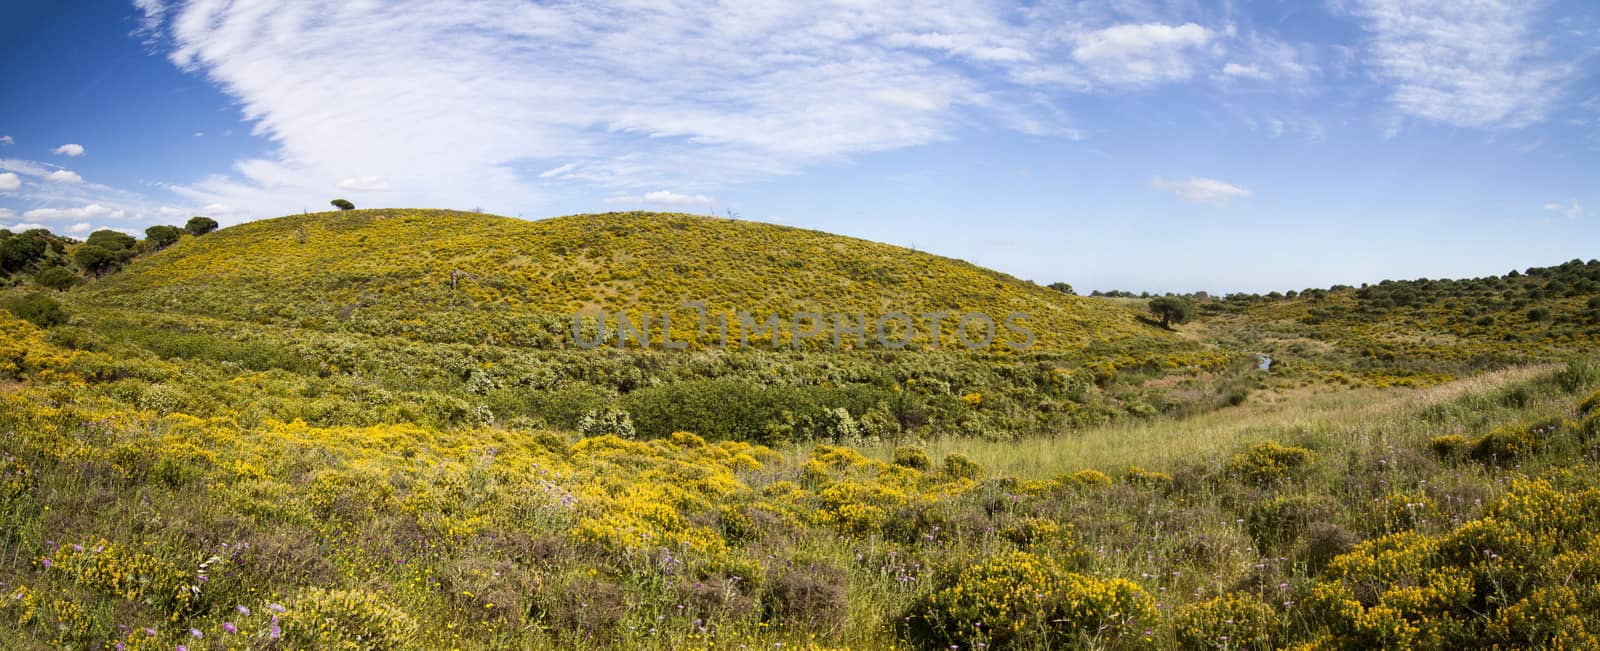 Algarve countryside hills with yellow bushes in Spring by membio